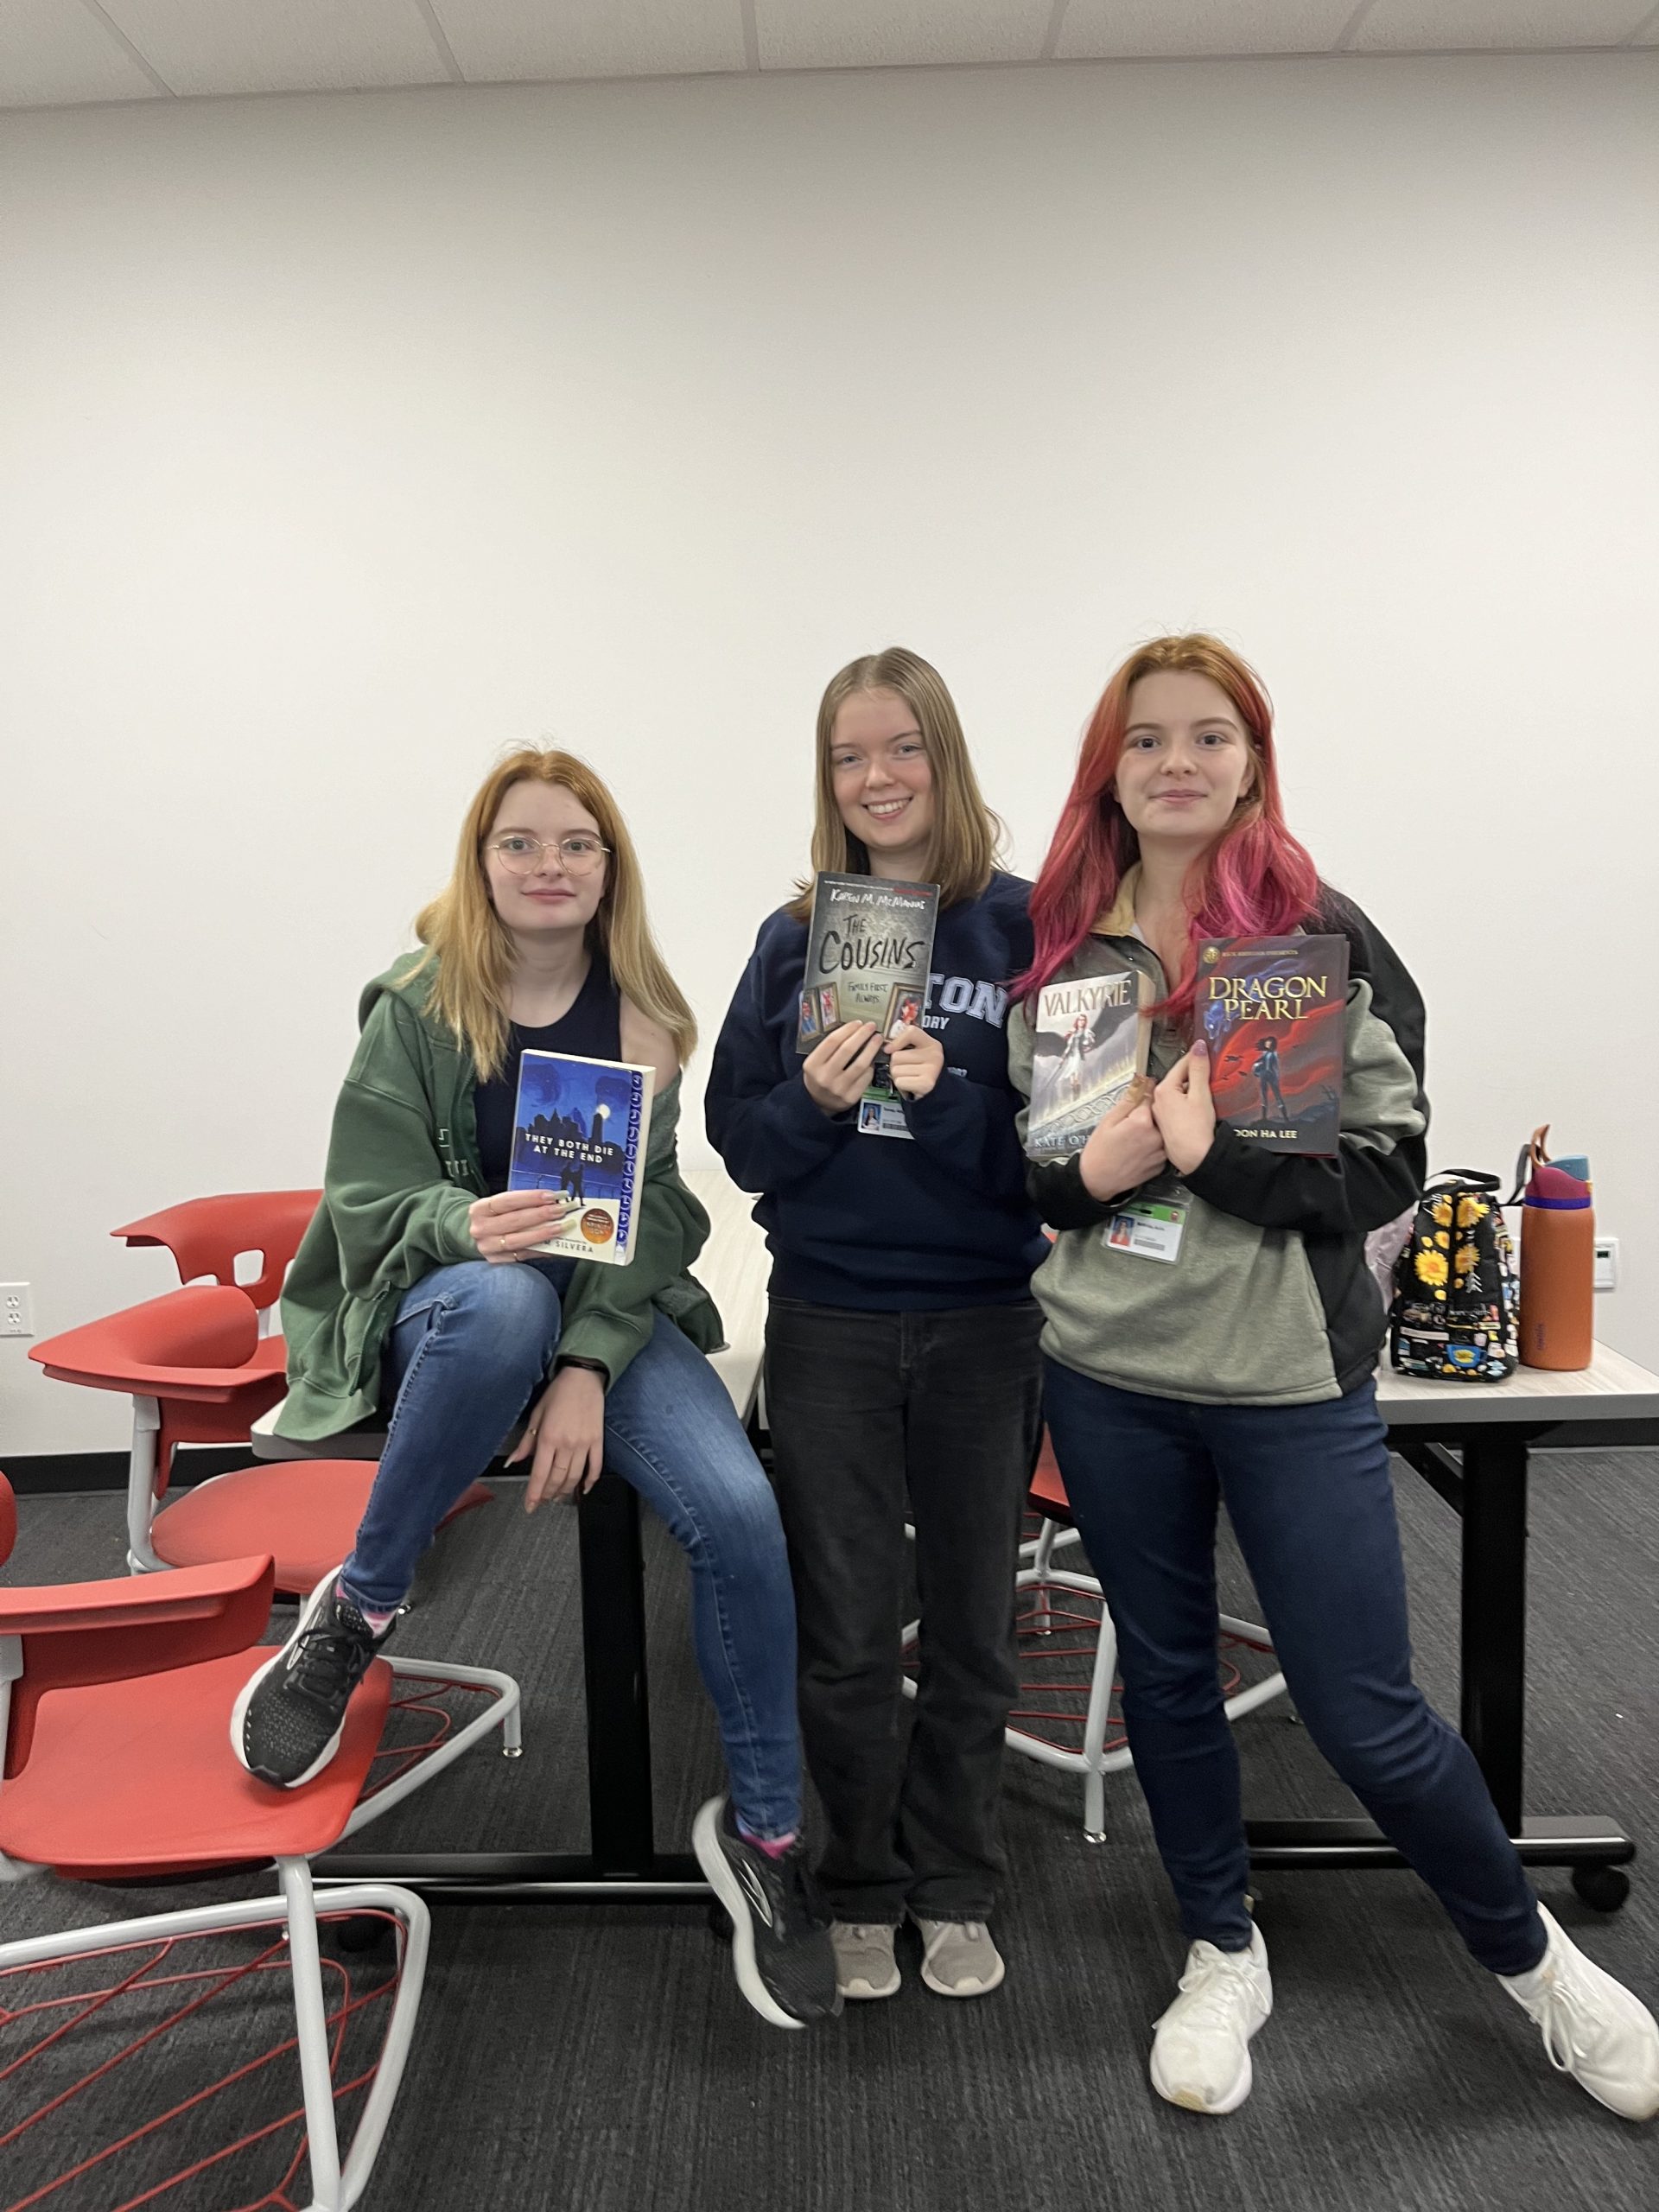 Junior Aoife McBride, right, stands with two other WRITE Club members holding the books they brought to the swap. McBride views WRITE Club meetings as a fun way to harness [her] creative energy.